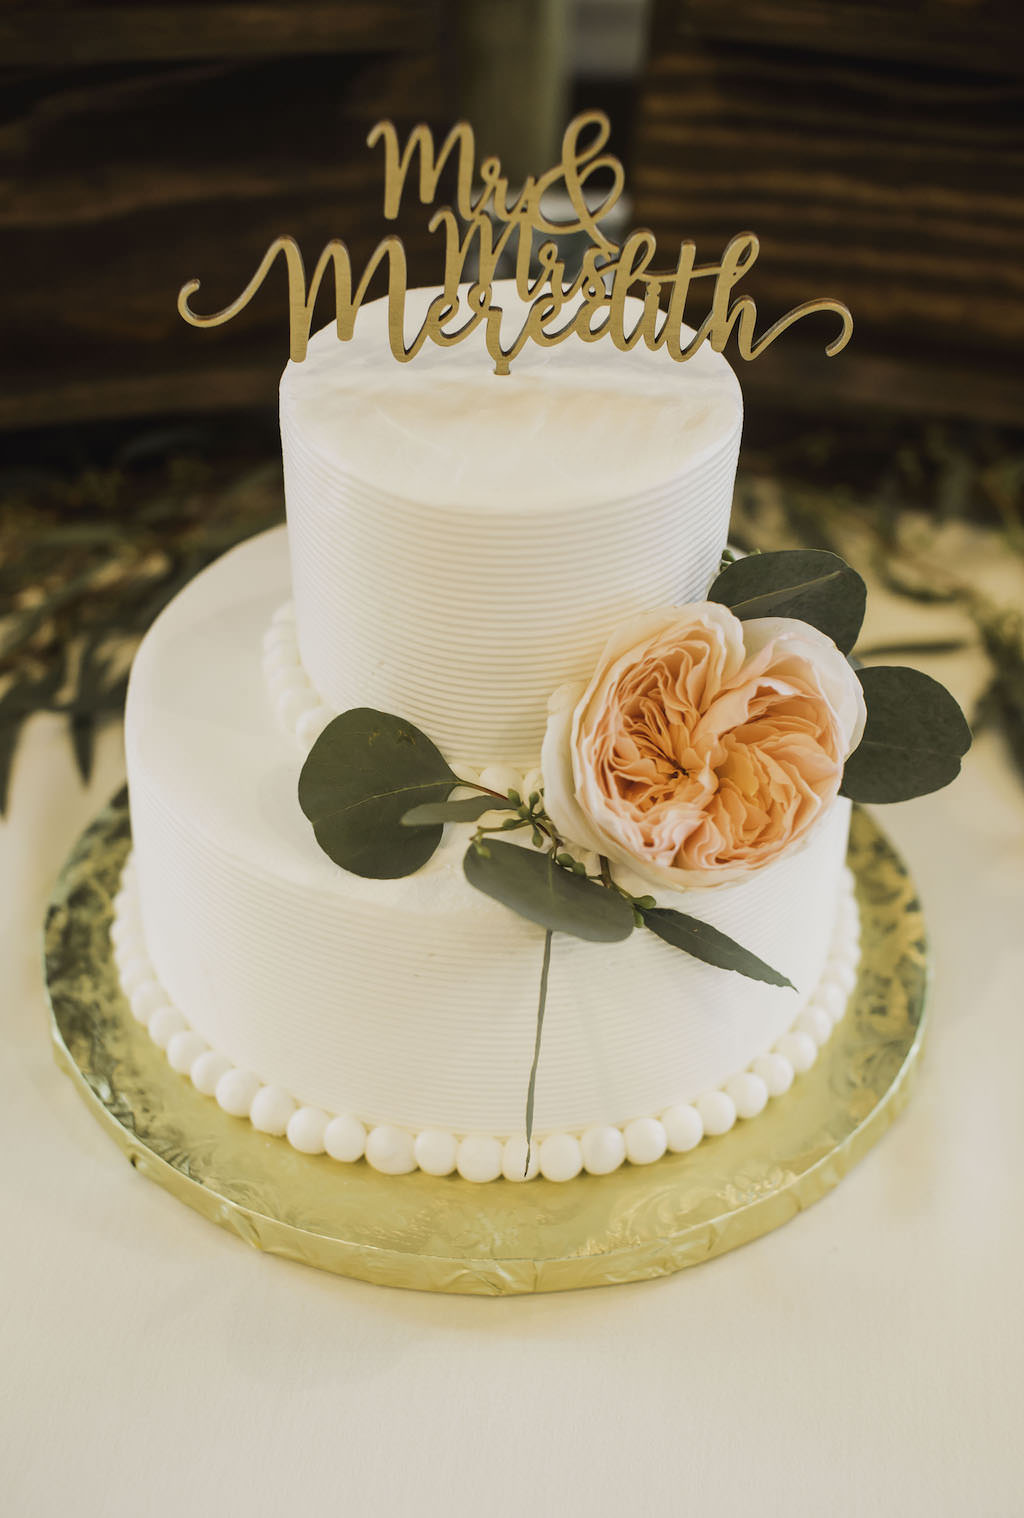 Simple White Two Tier Wedding Cake with Beaded Bottom and Blush Pink Garden Rose and Green Silver Dollar Leaf, Custom Personalized Laser Cut Cake Topper